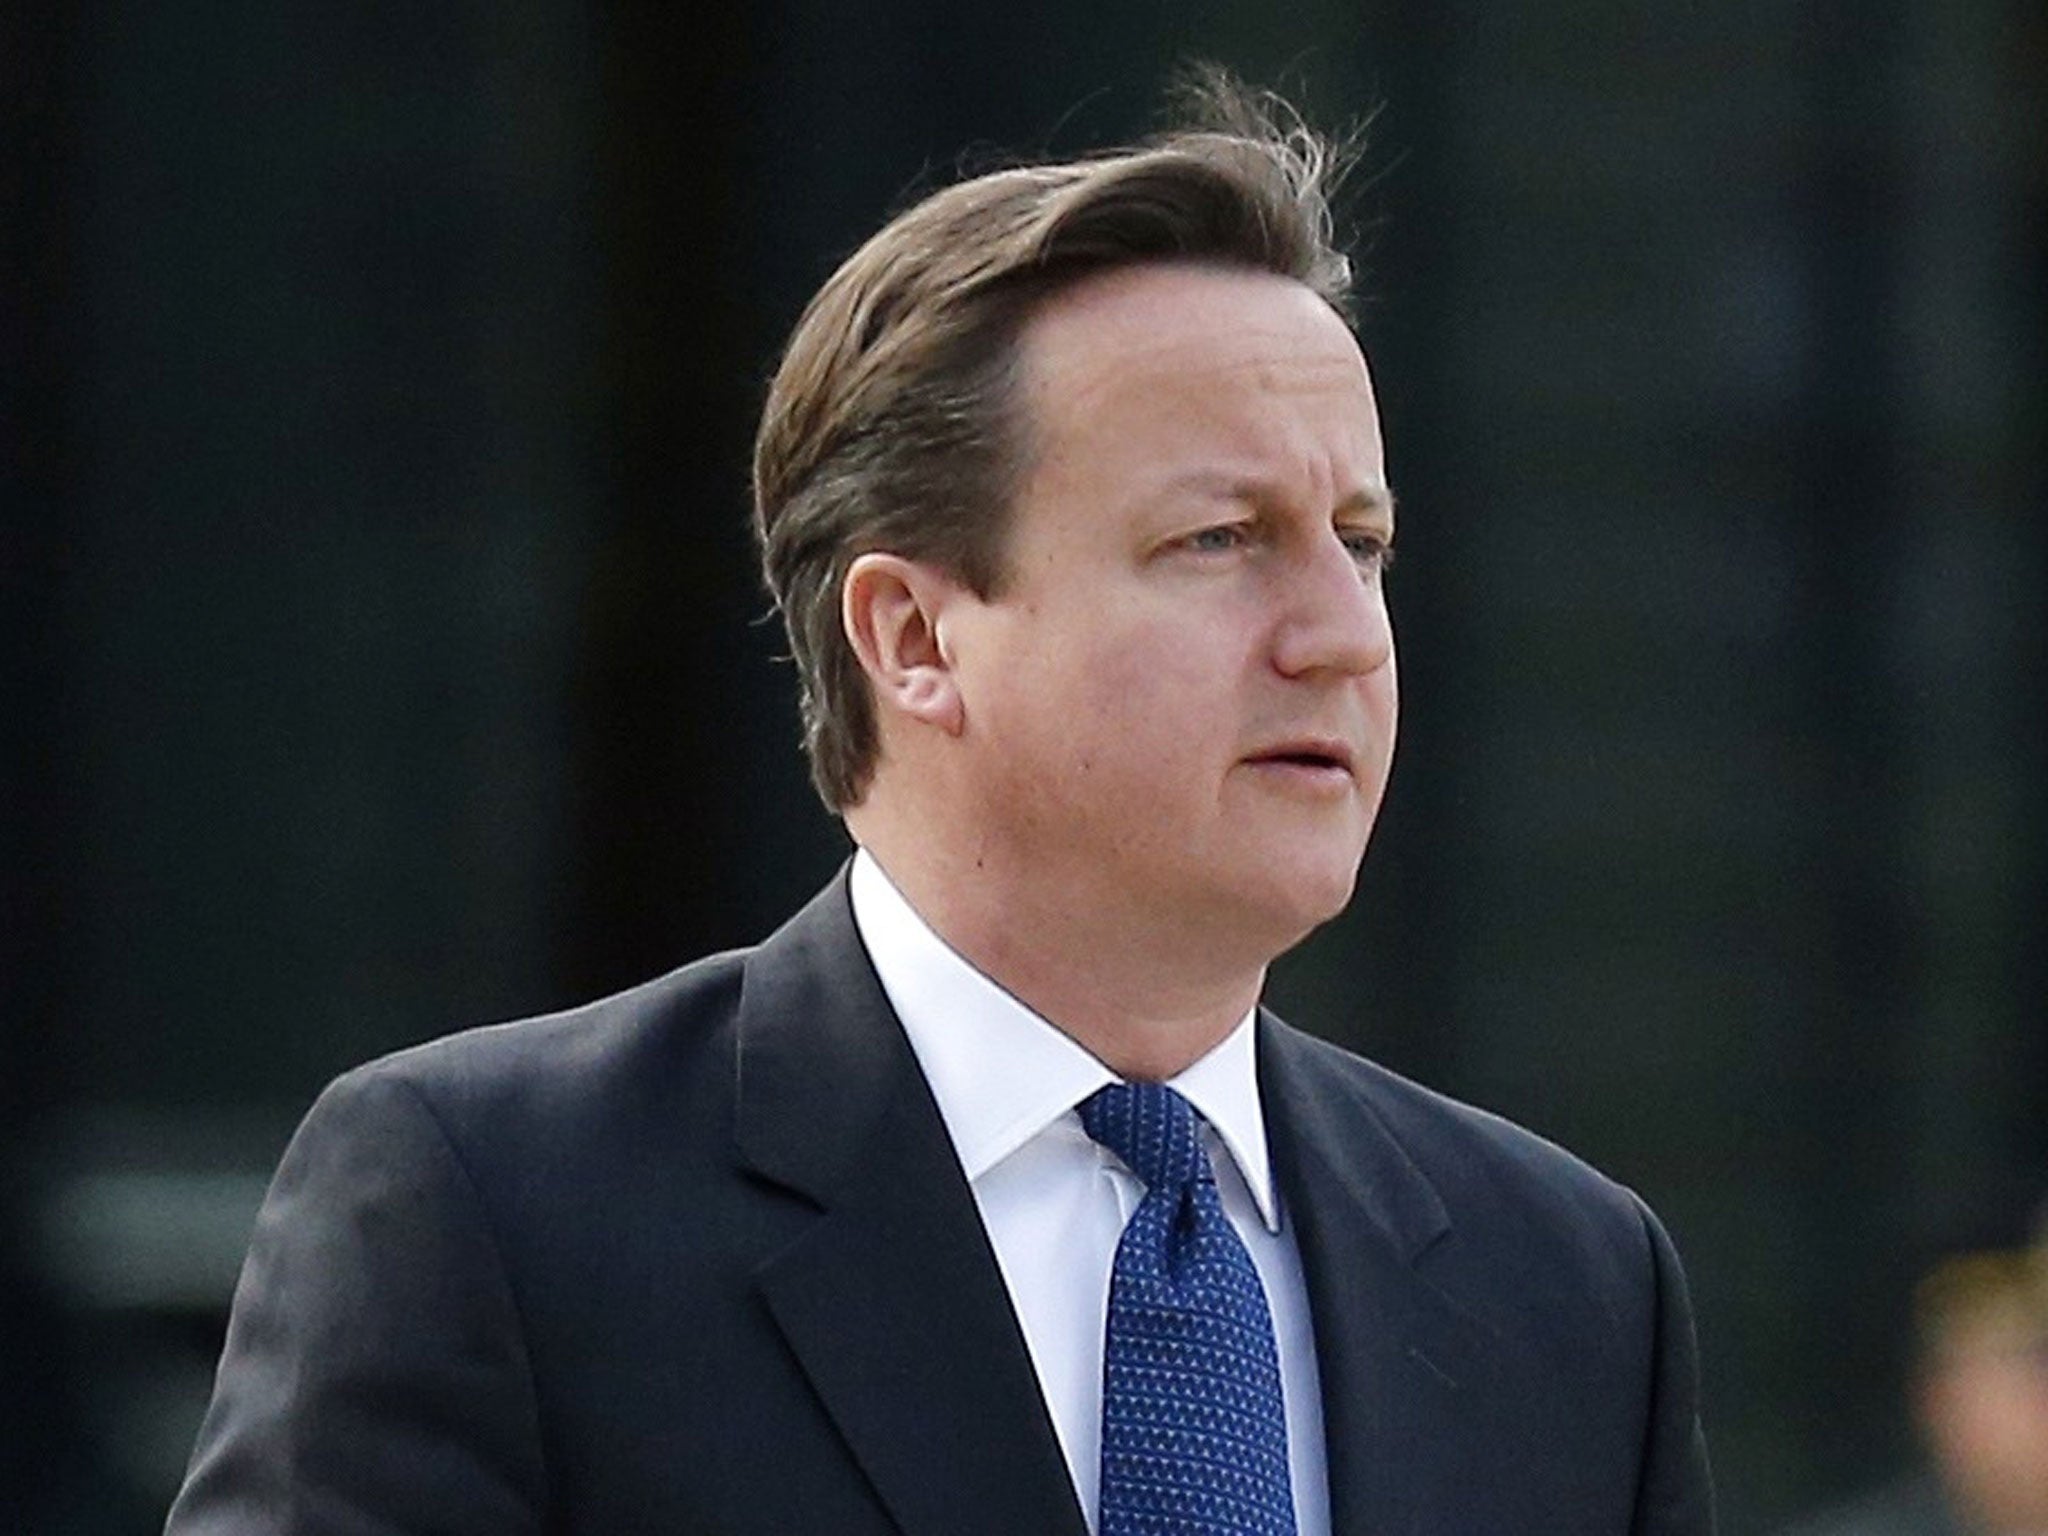 David Cameron called for a 'new global partnership' to tackle some of the biggest problems facing the developing world